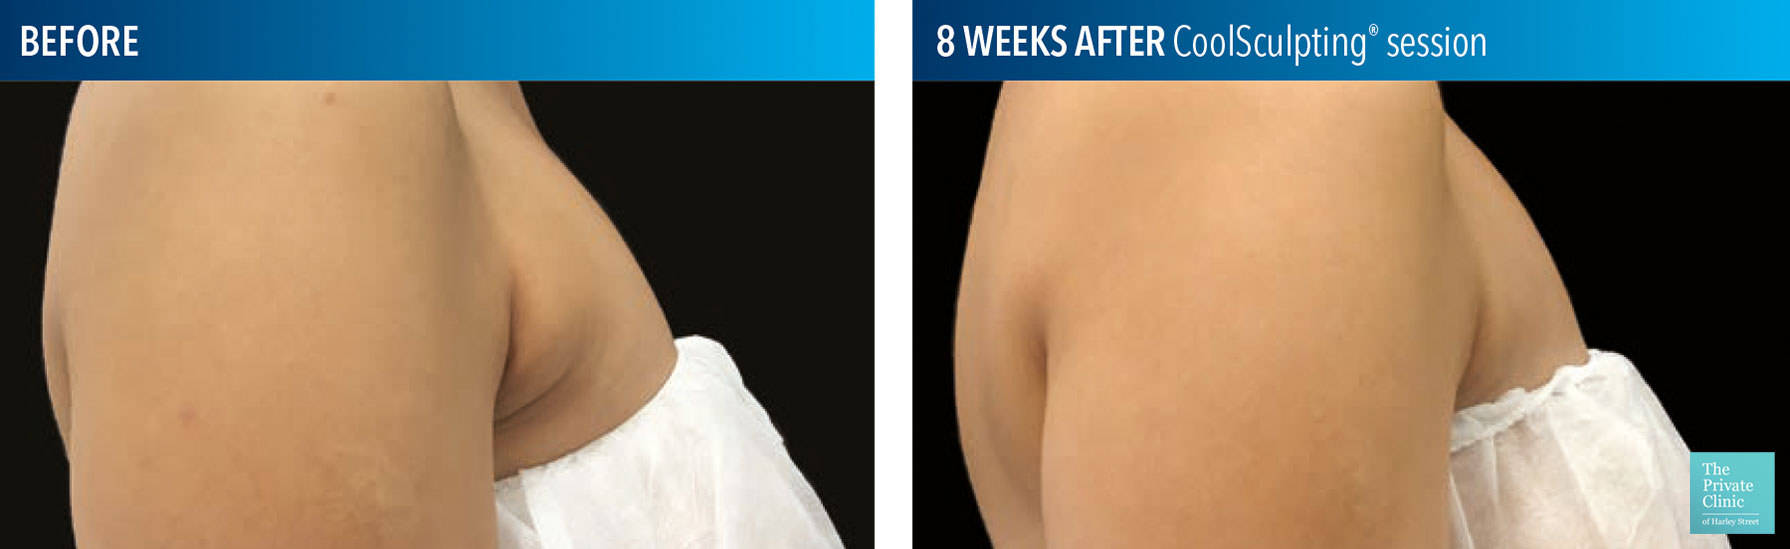 coolsculpting fat freezing results before after photos bra fat